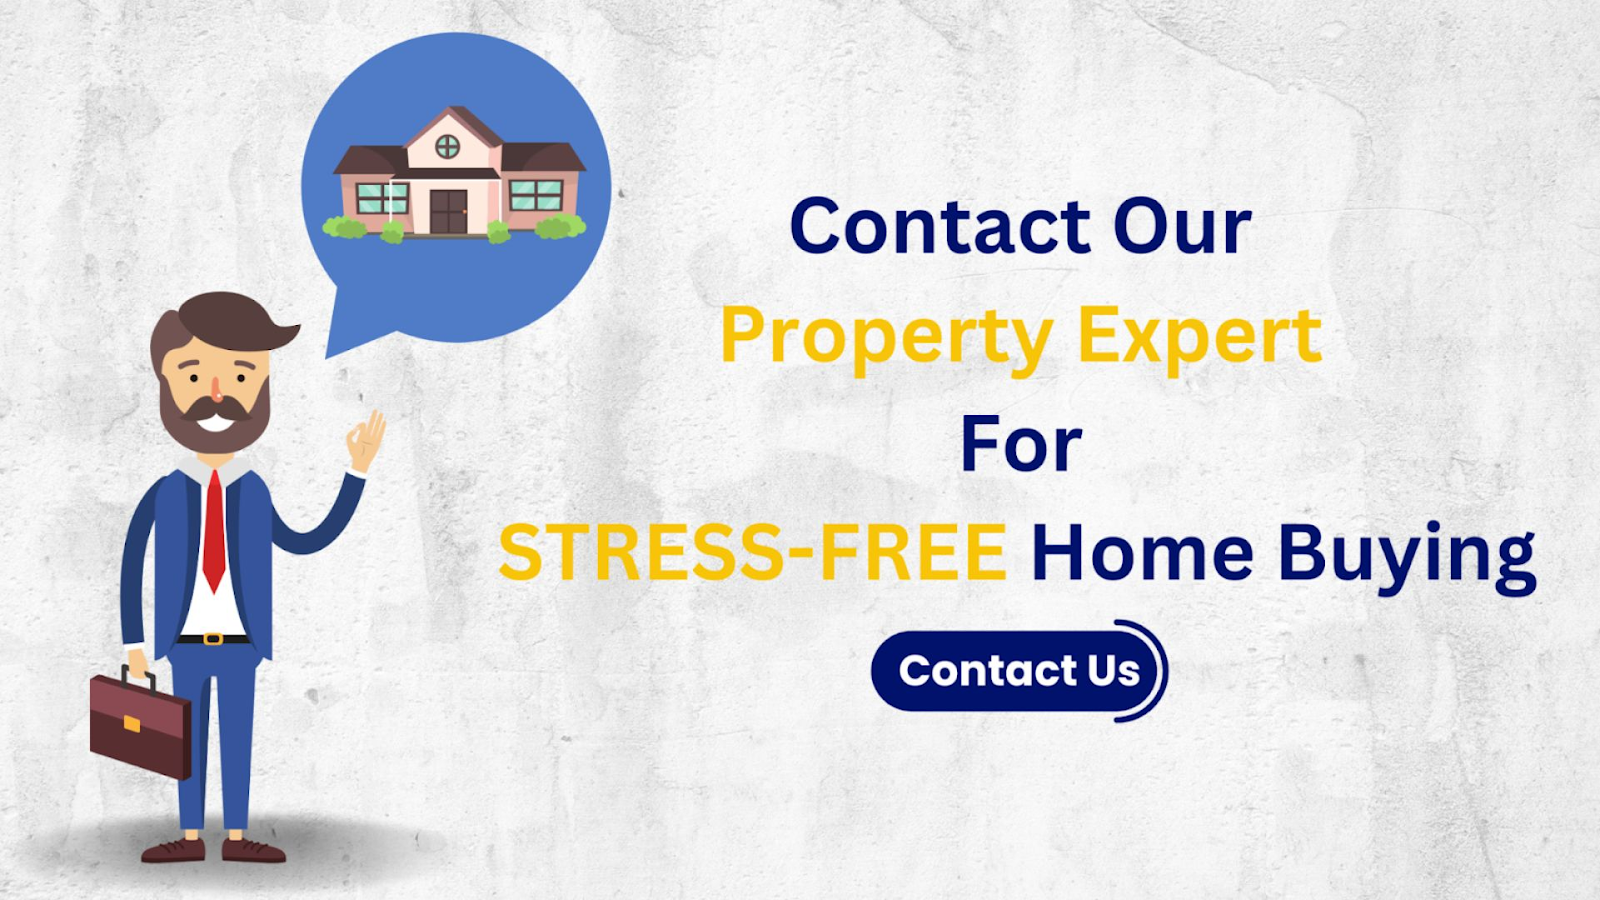 Contact a property expert for stress-free home buying at PropertyCloud.